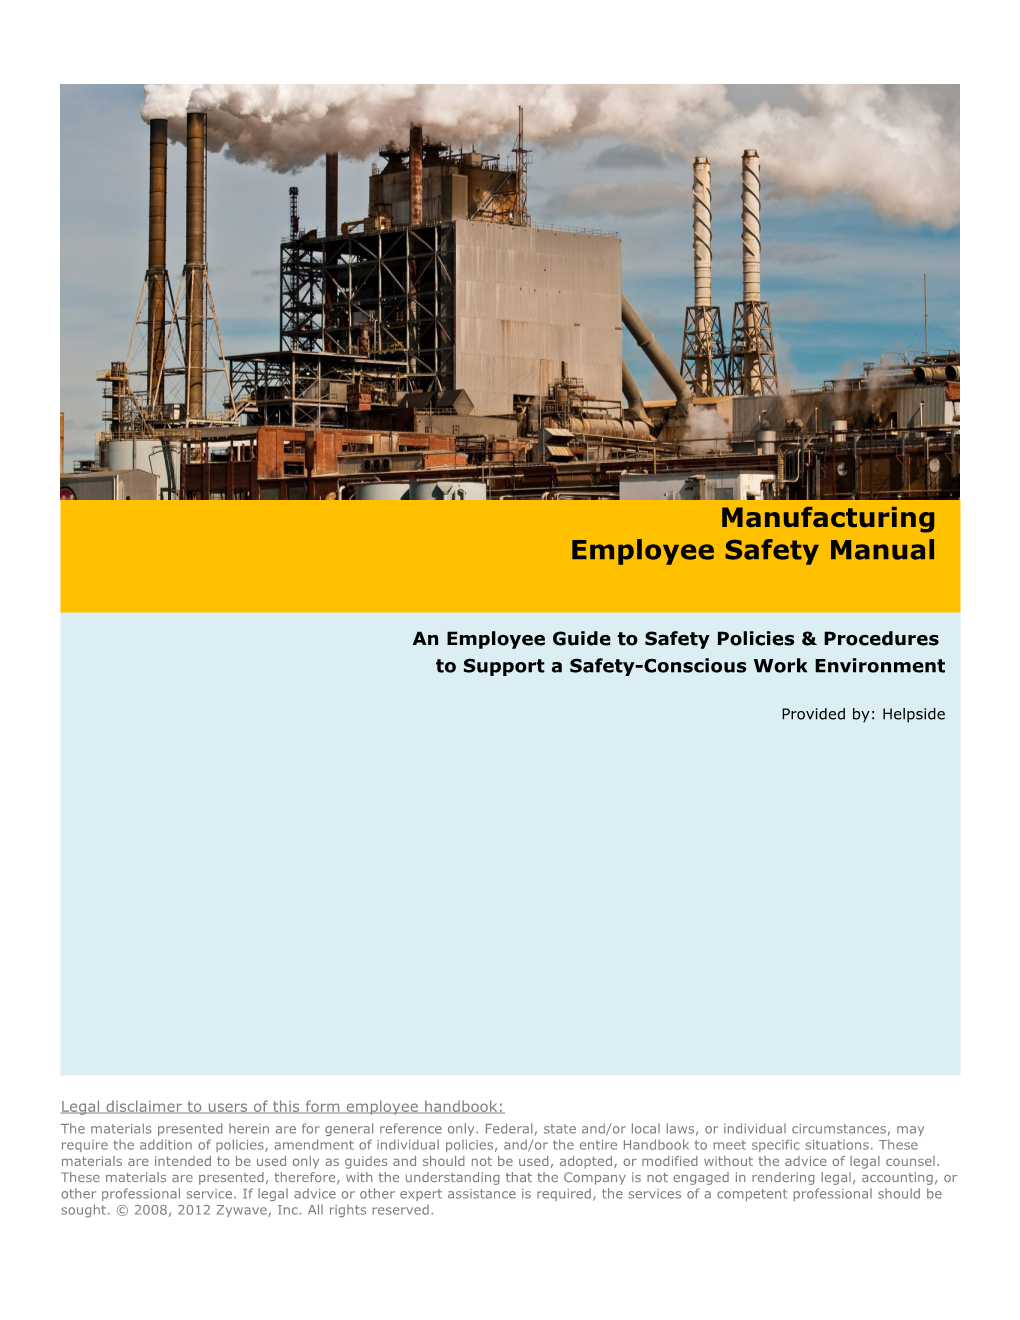 An Employee Guide to Safety Policies & Procedures